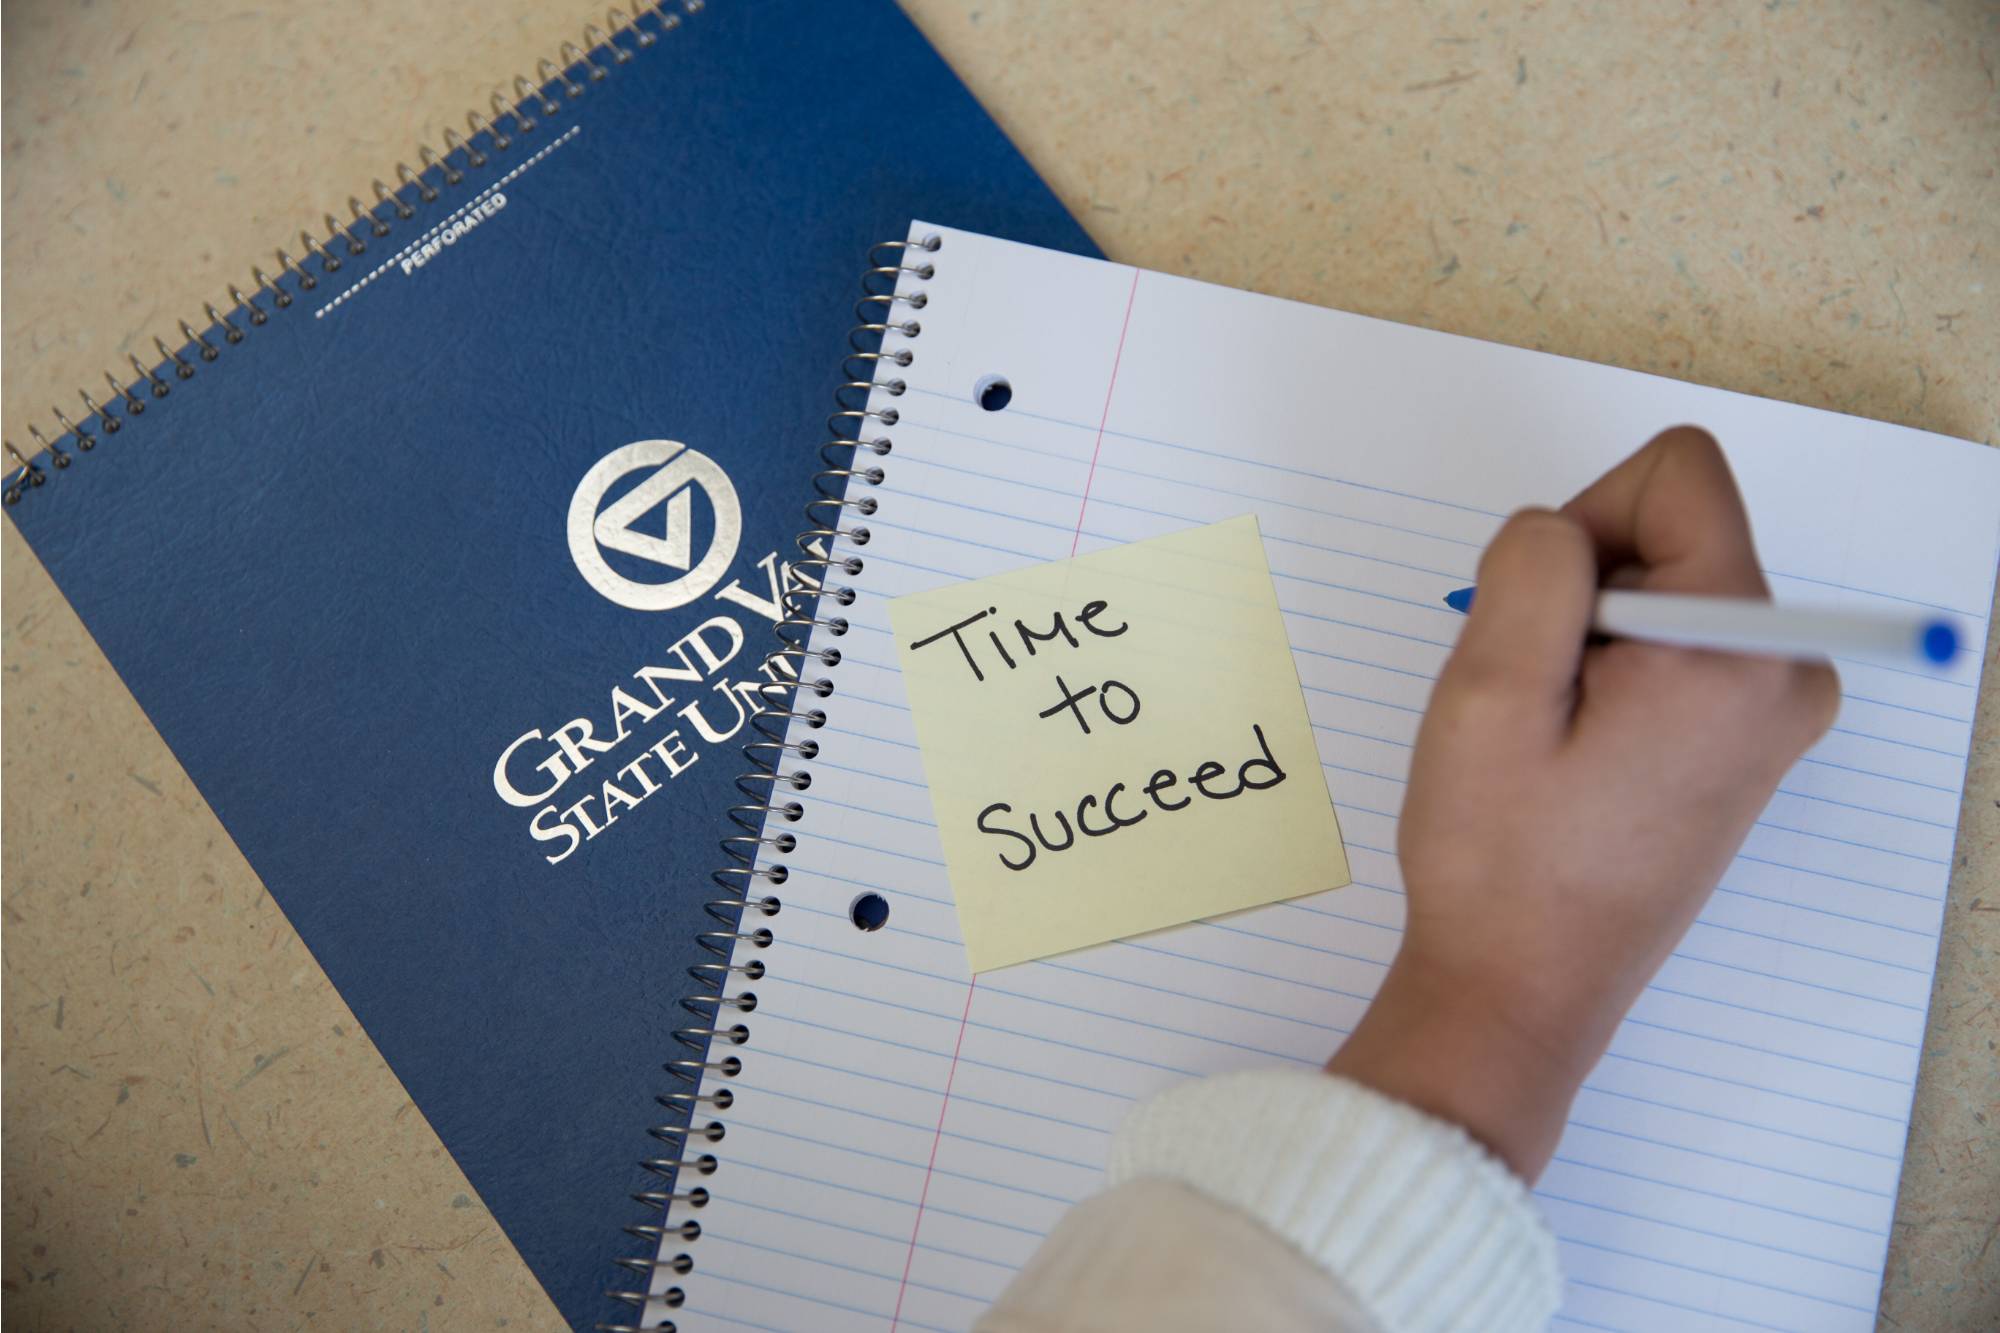 Sticky note with "Time to Succeed" written on it stuck to a blank notebook